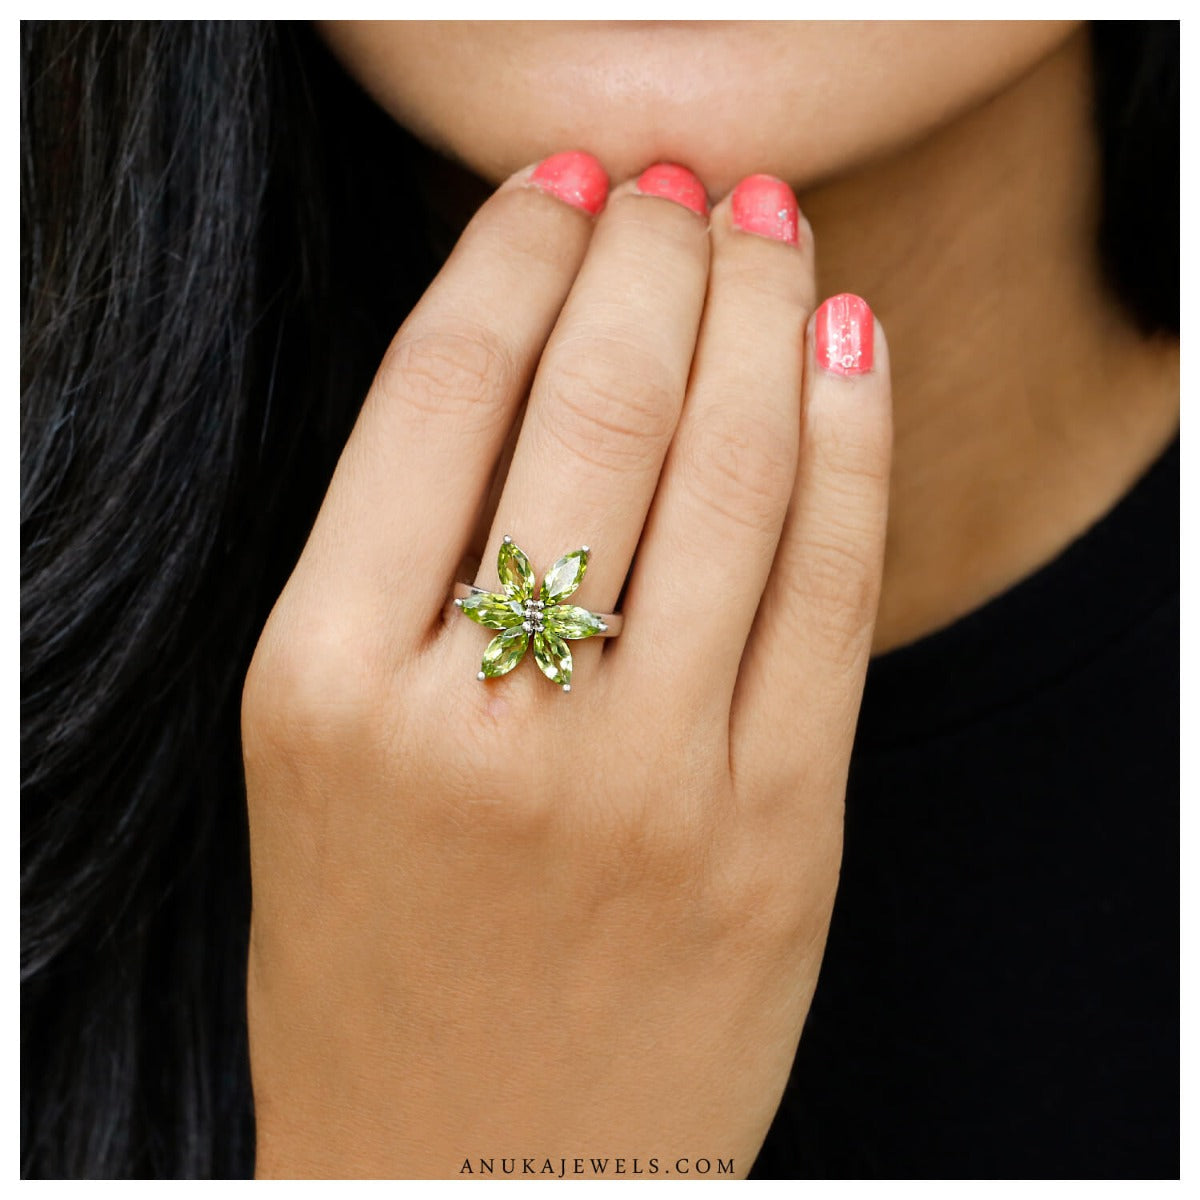 buy silver ring, sterling silver ring, buy peridot ring, peridot jewelry, green ring, flower ring